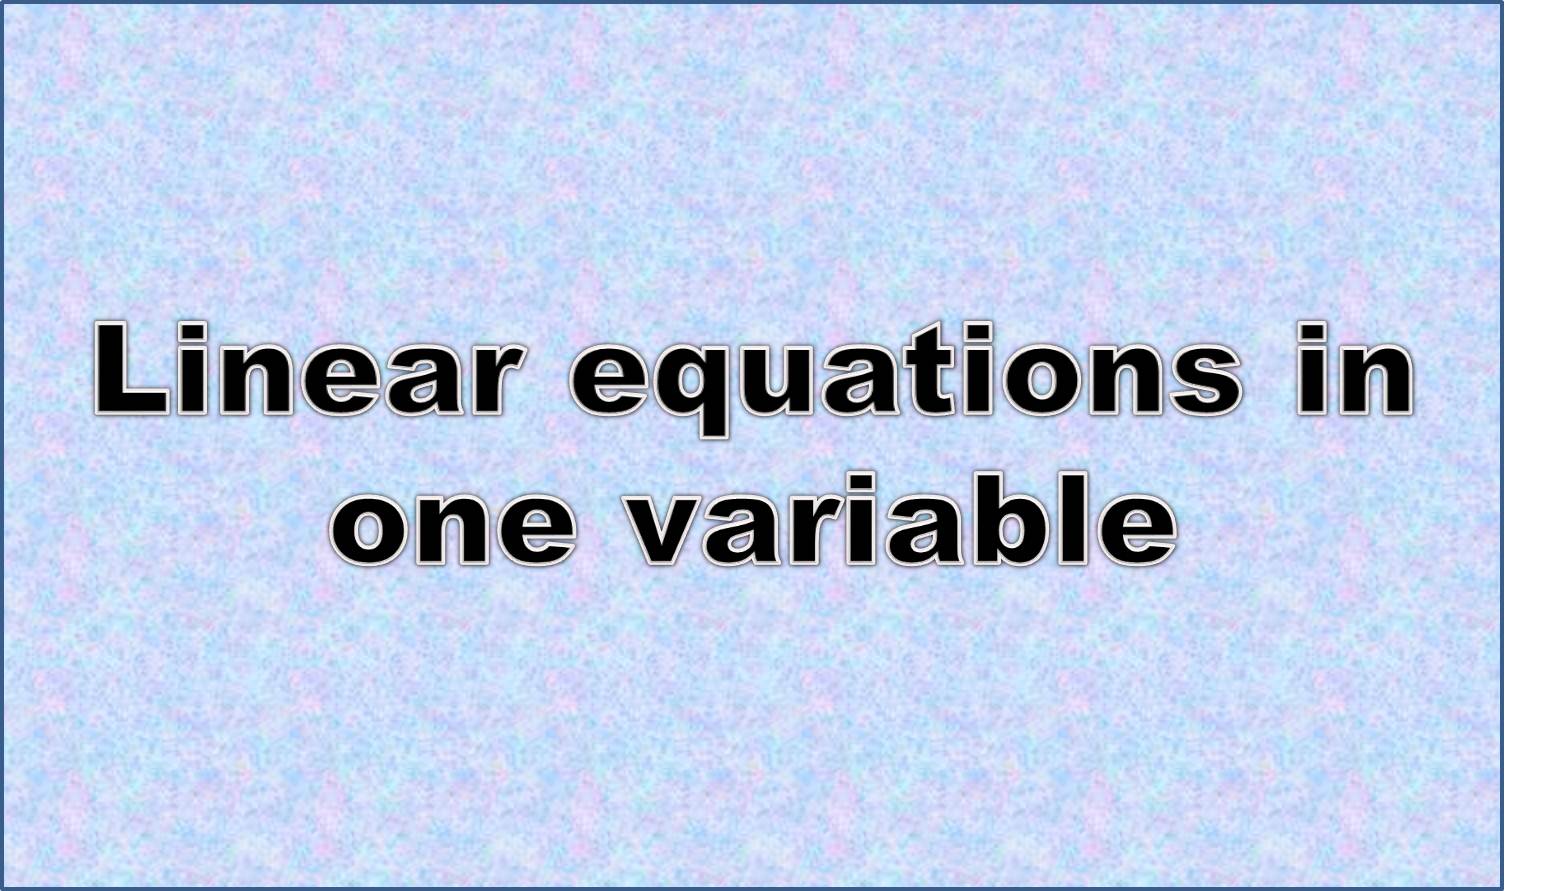 http://study.aisectonline.com/images/Equation with the variable in the denominator.jpg